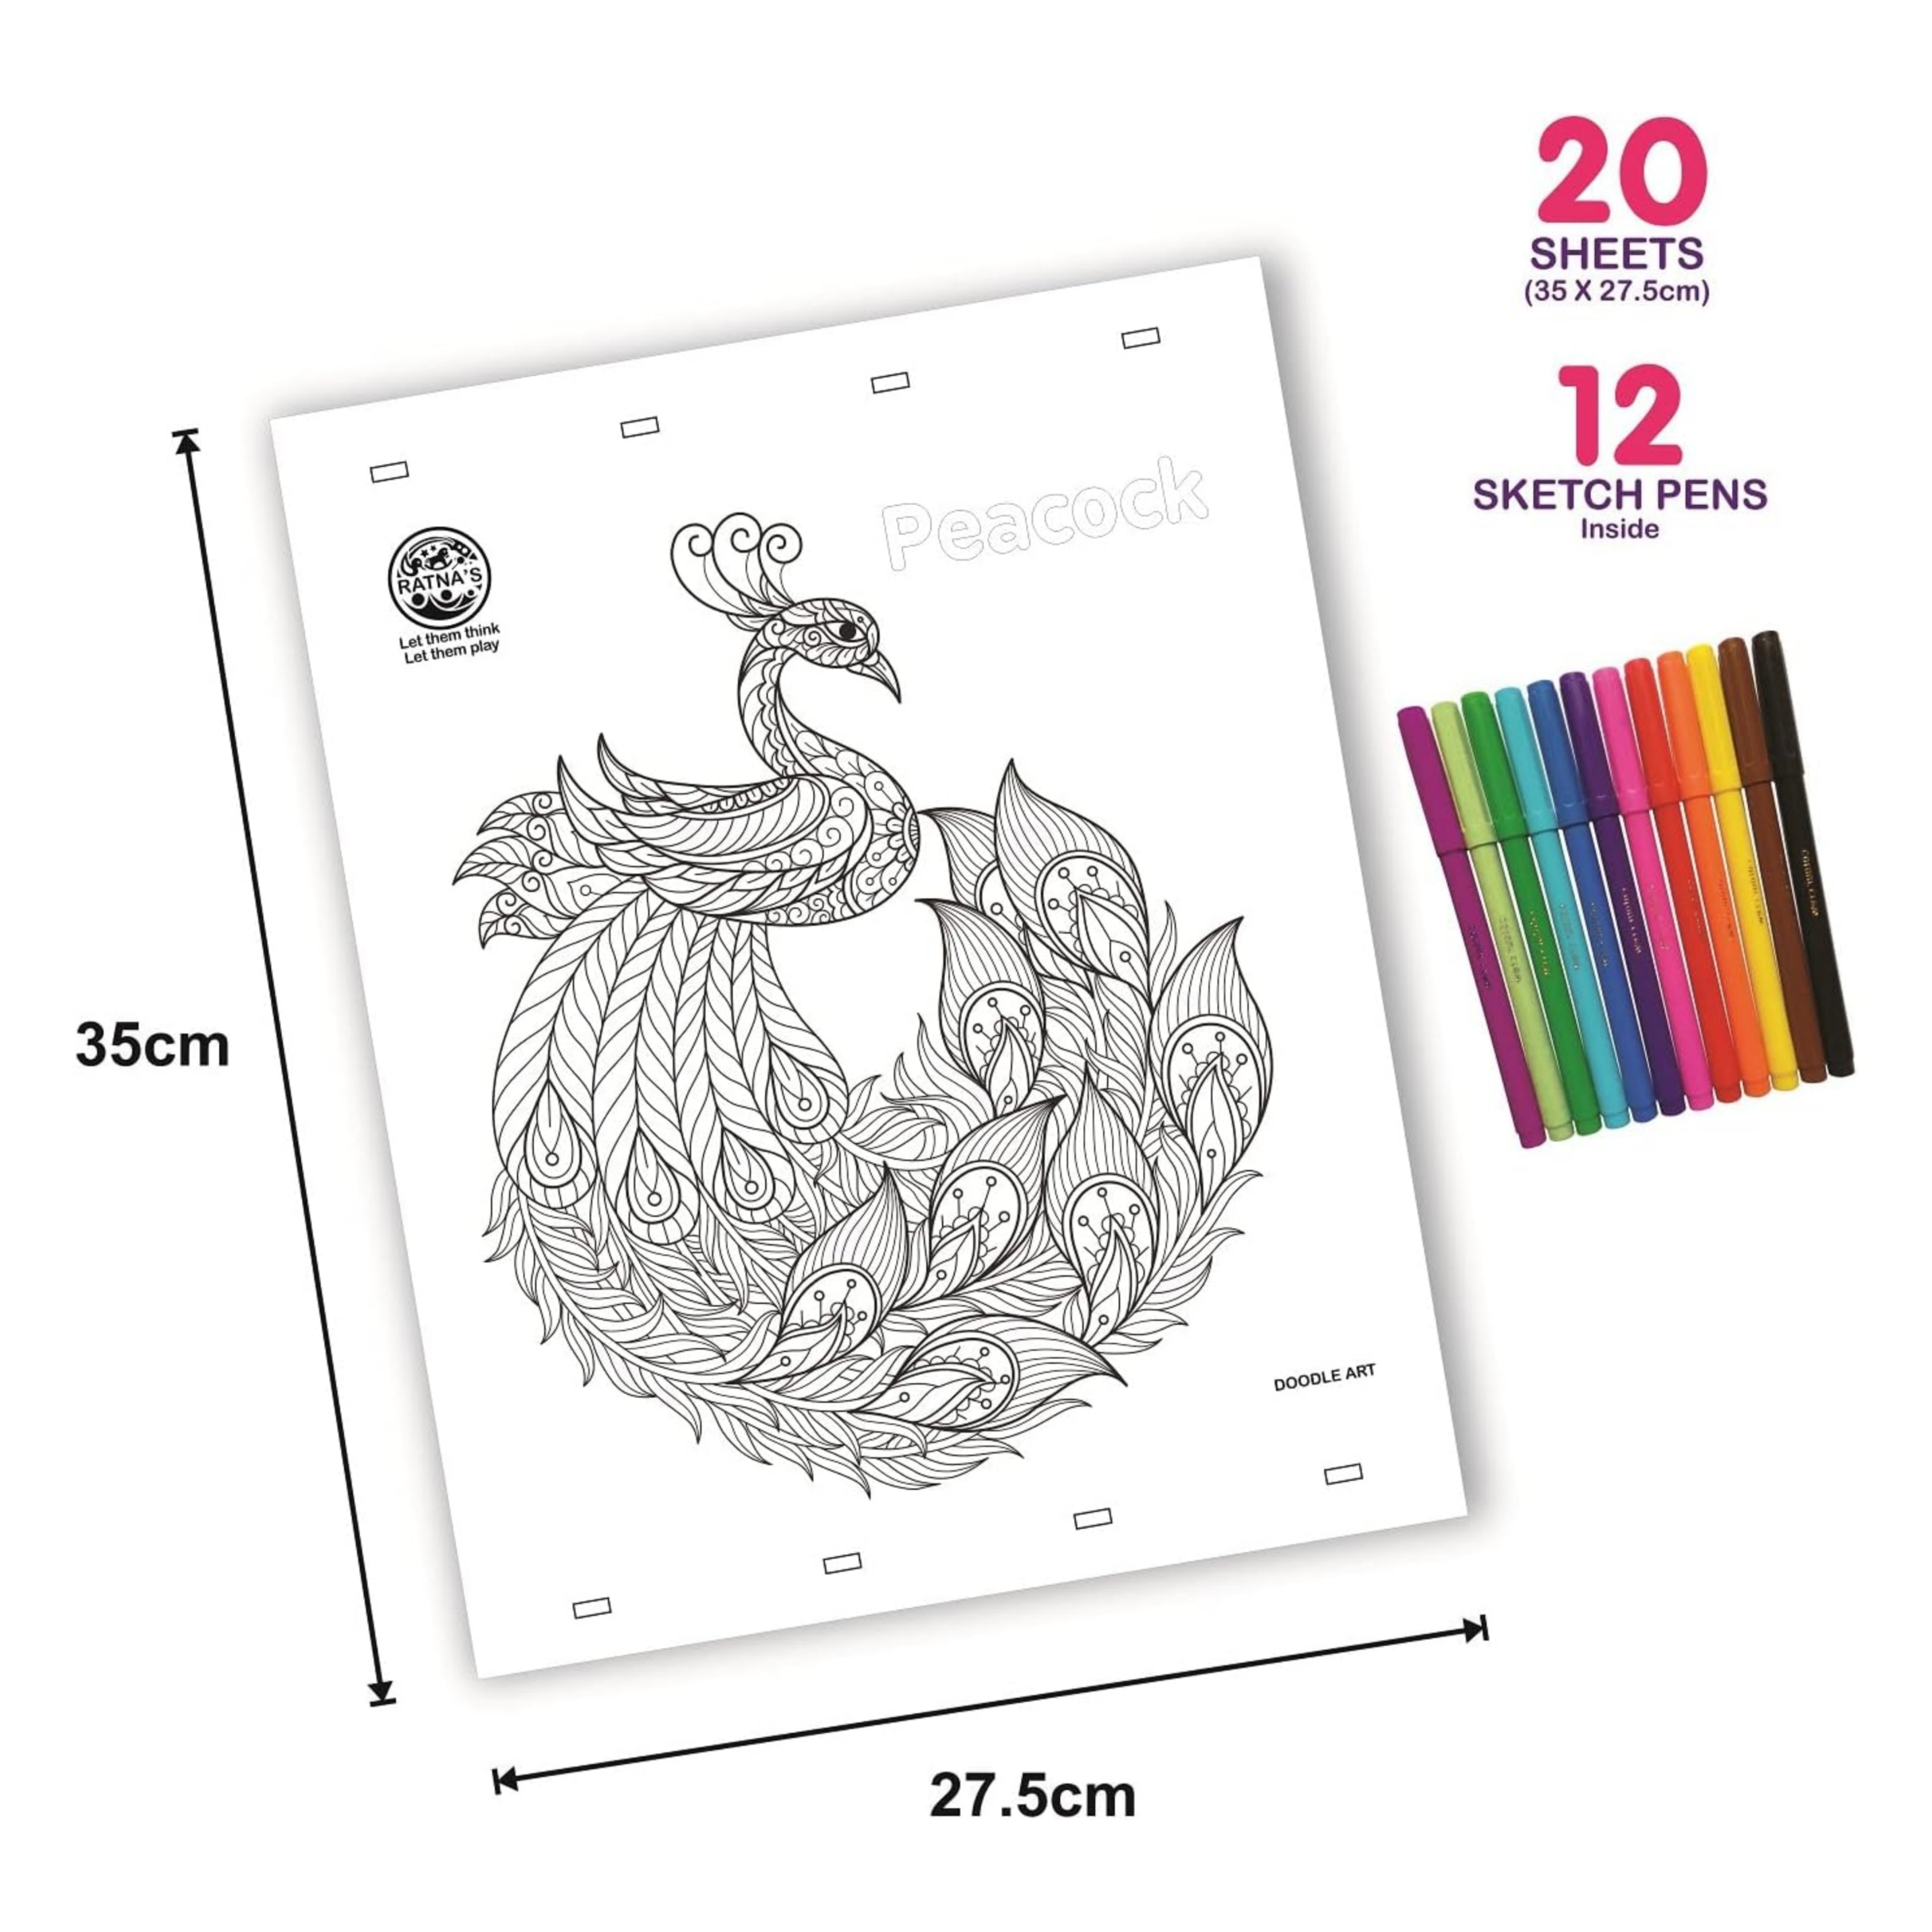 Image - Peacock Drawing With Colour - Free Transparent PNG Clipart Images  Download